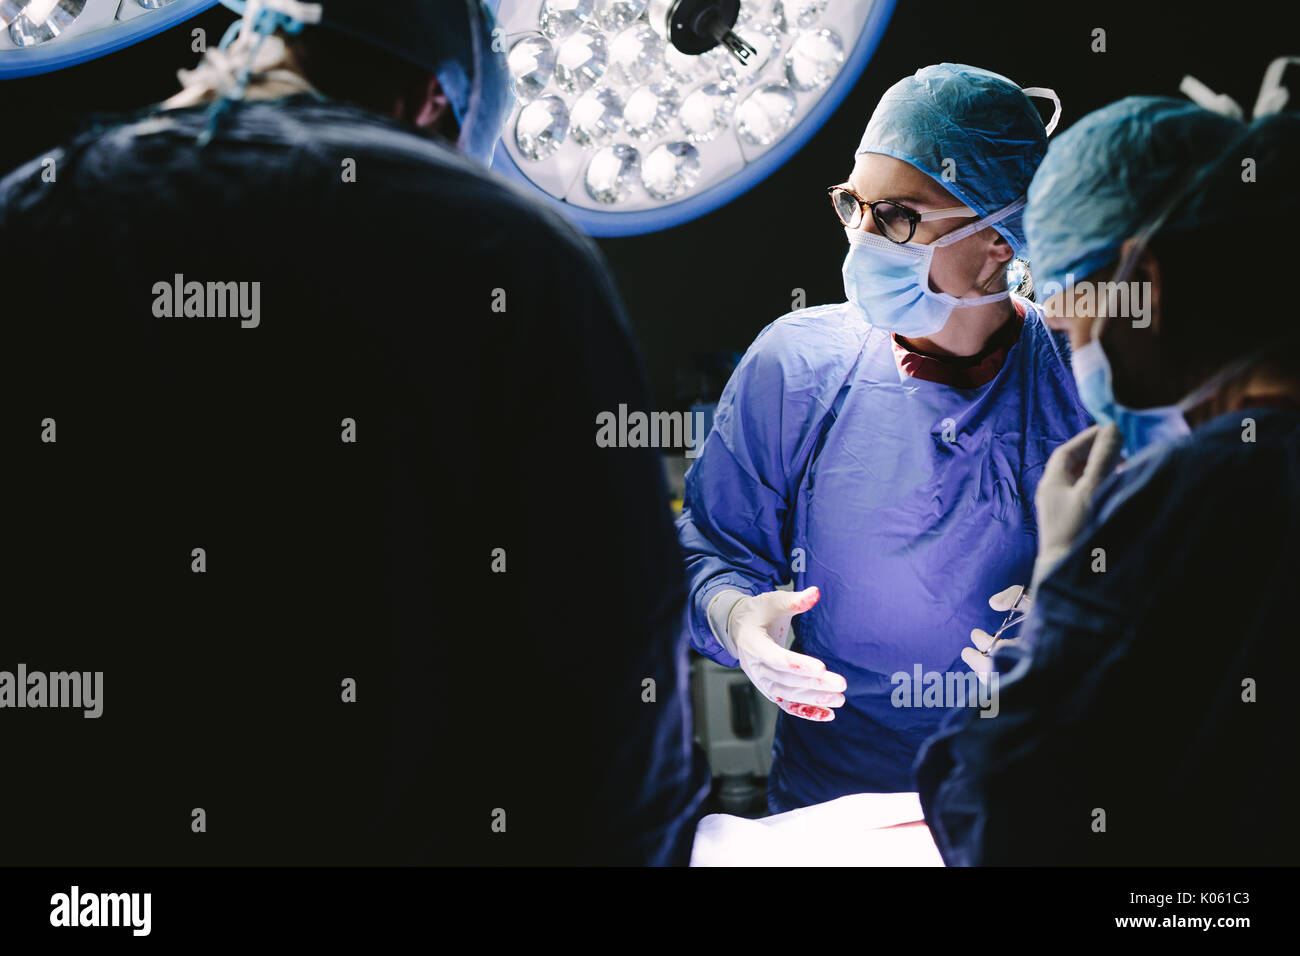 Surgeons team discussing during surgery. Group of doctors in hospital operation theater. Stock Photo